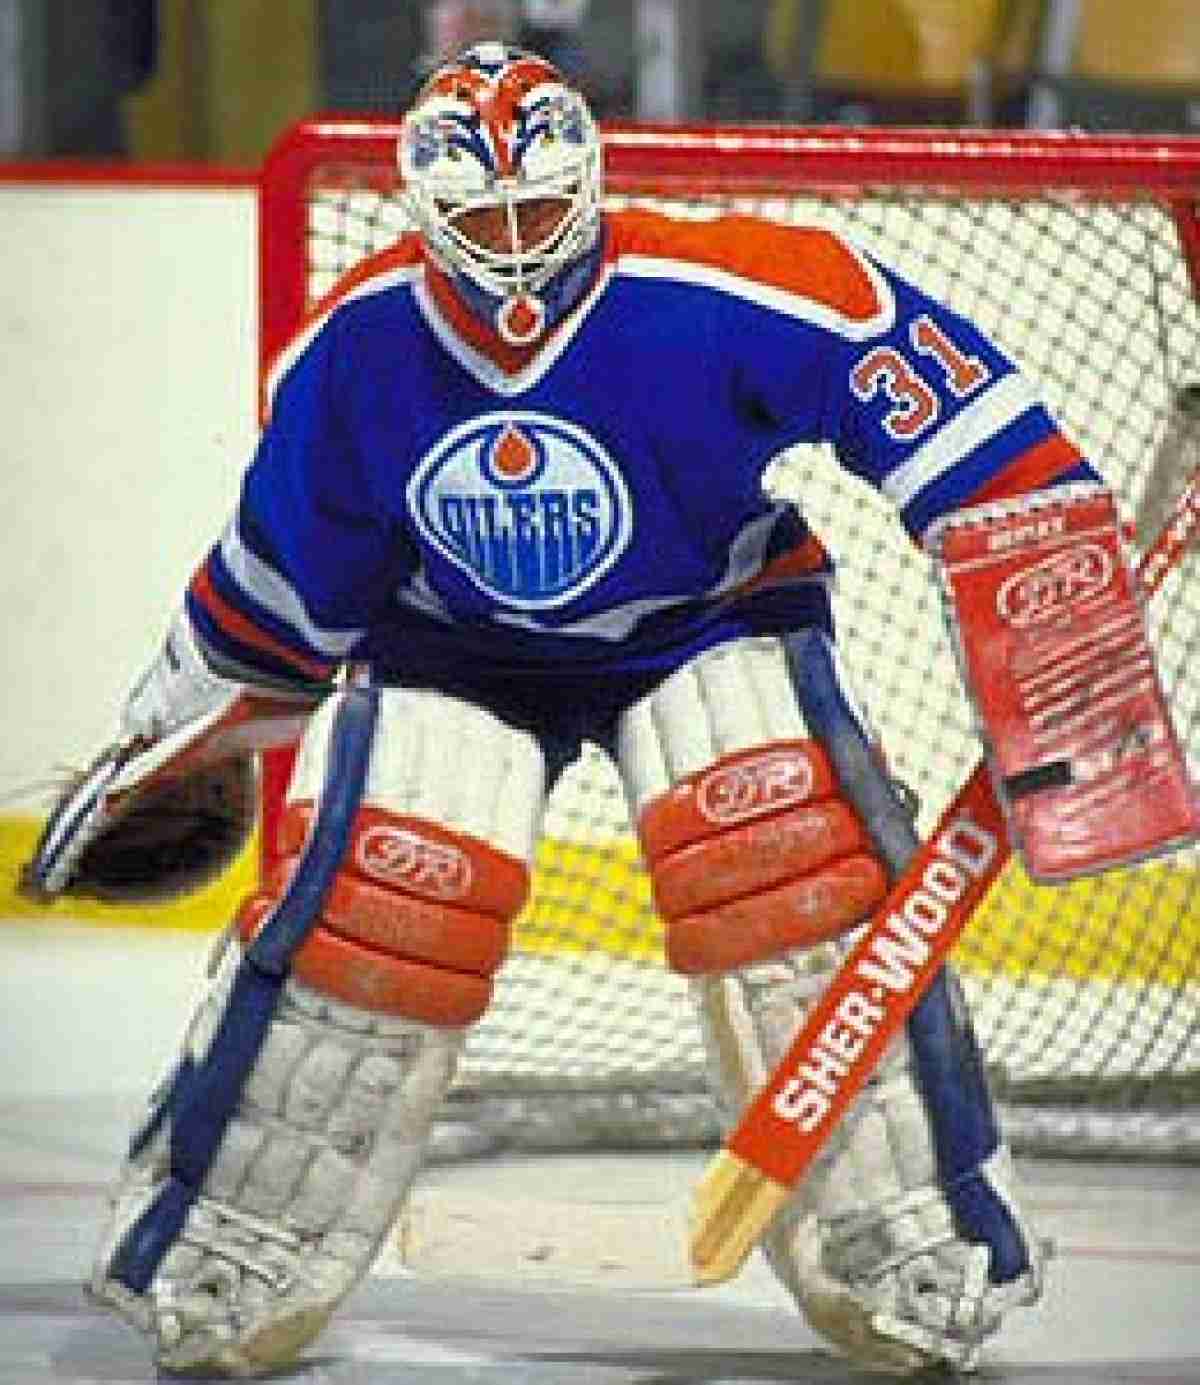 As athletes test golf, hockey Hall of Famer Grant Fuhr content to play his  game